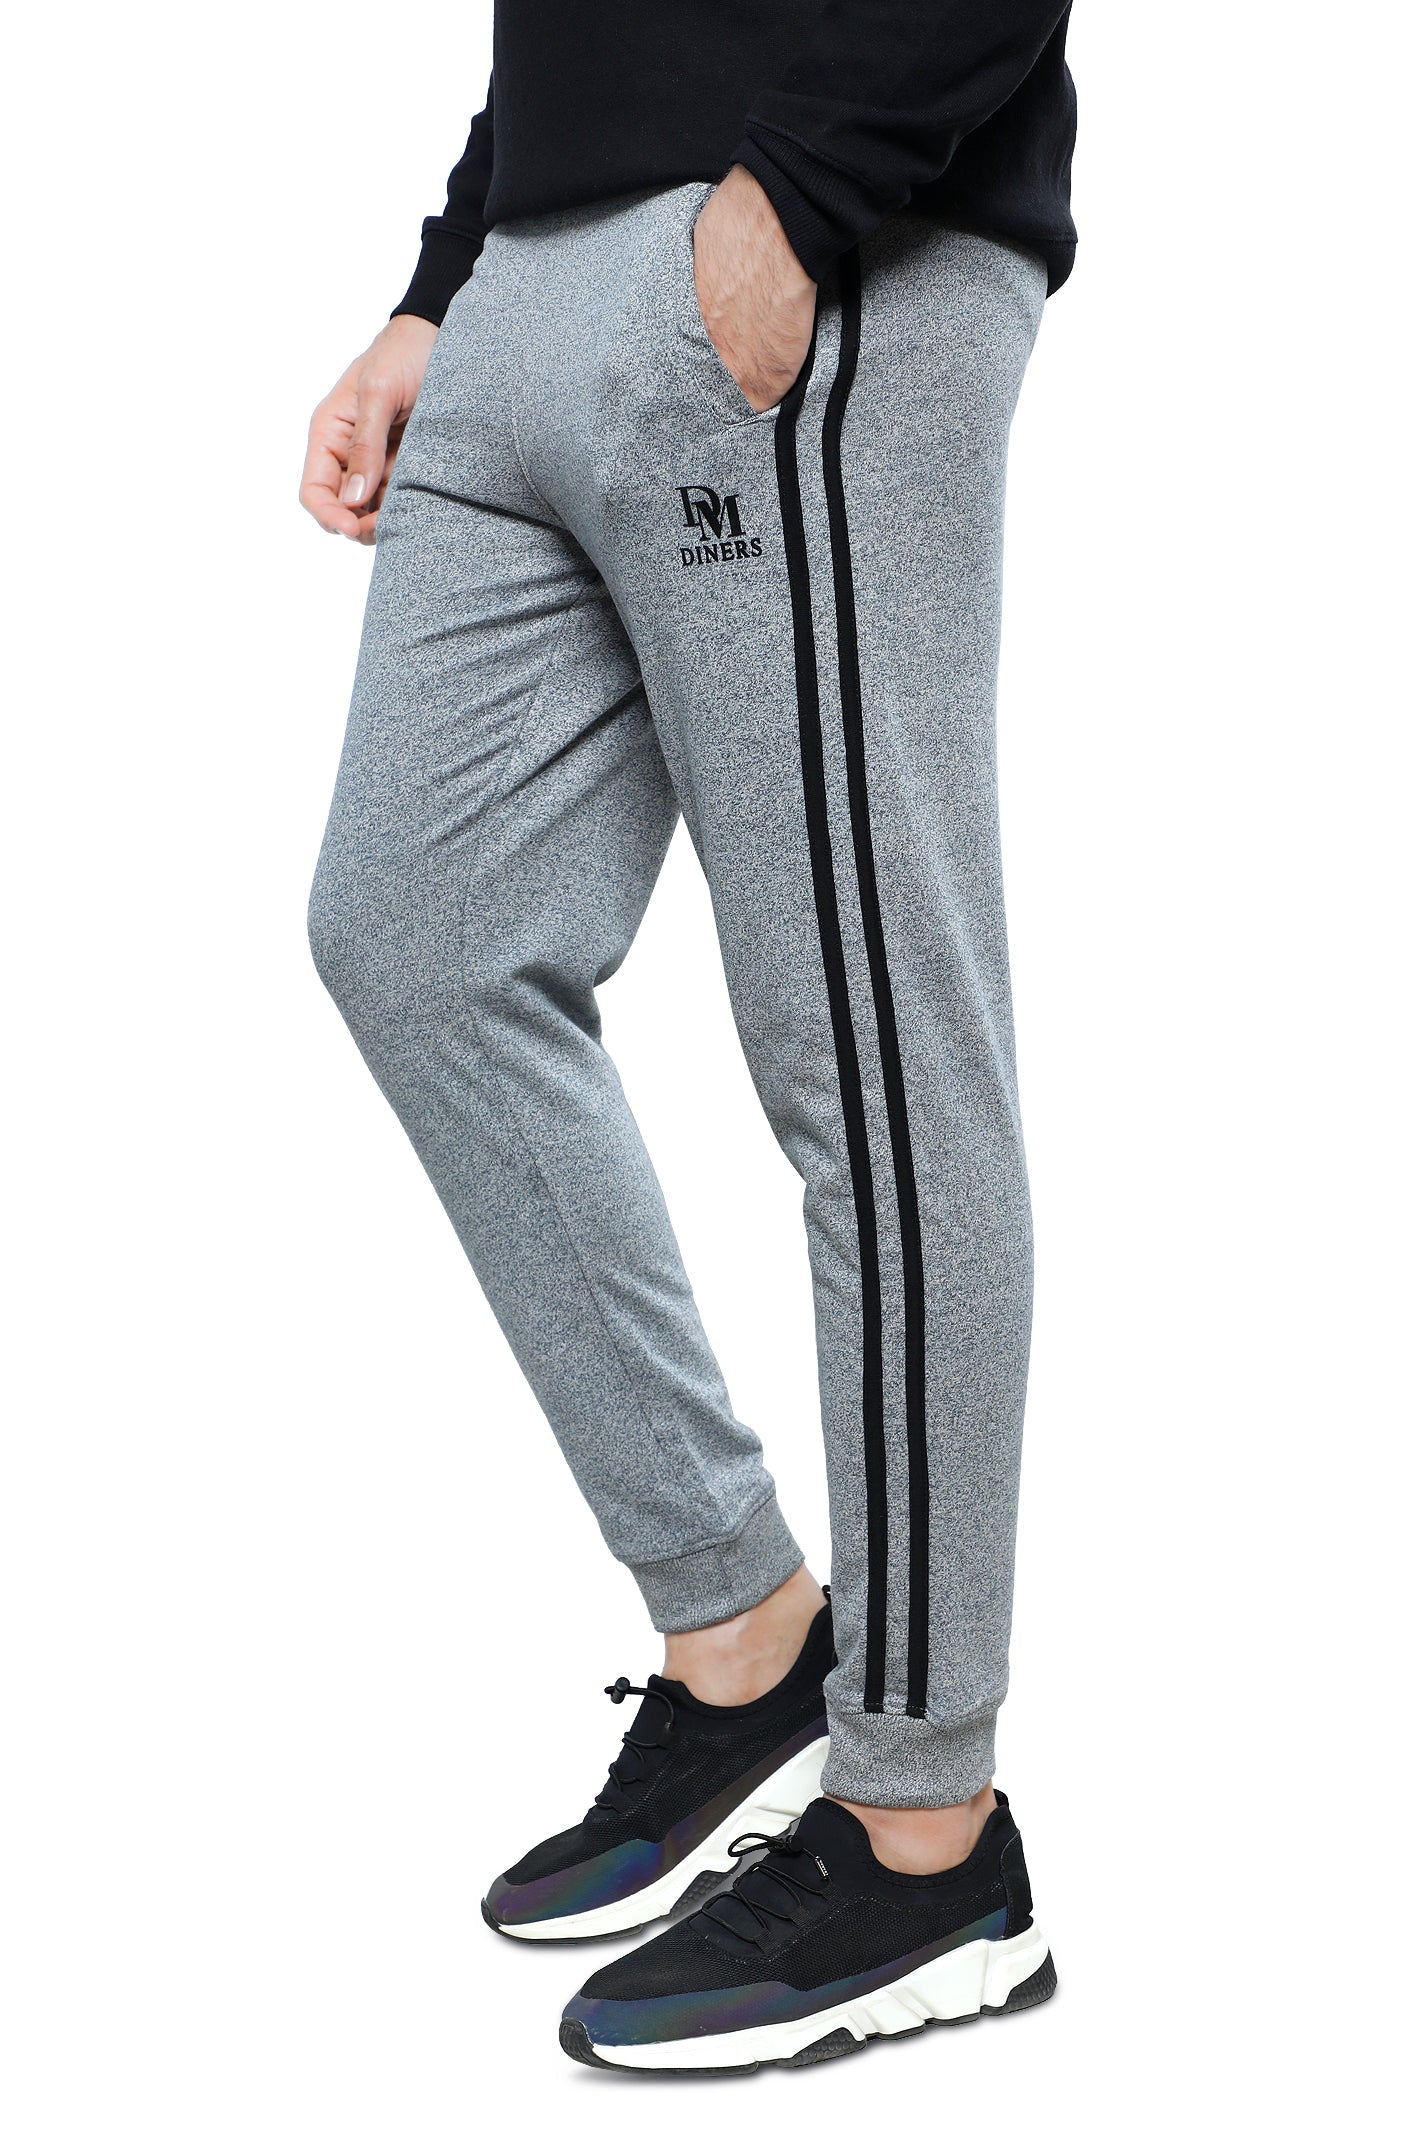 Diner's Men's Sports Trouser SKU: FA989-CHARCOAL - Diners